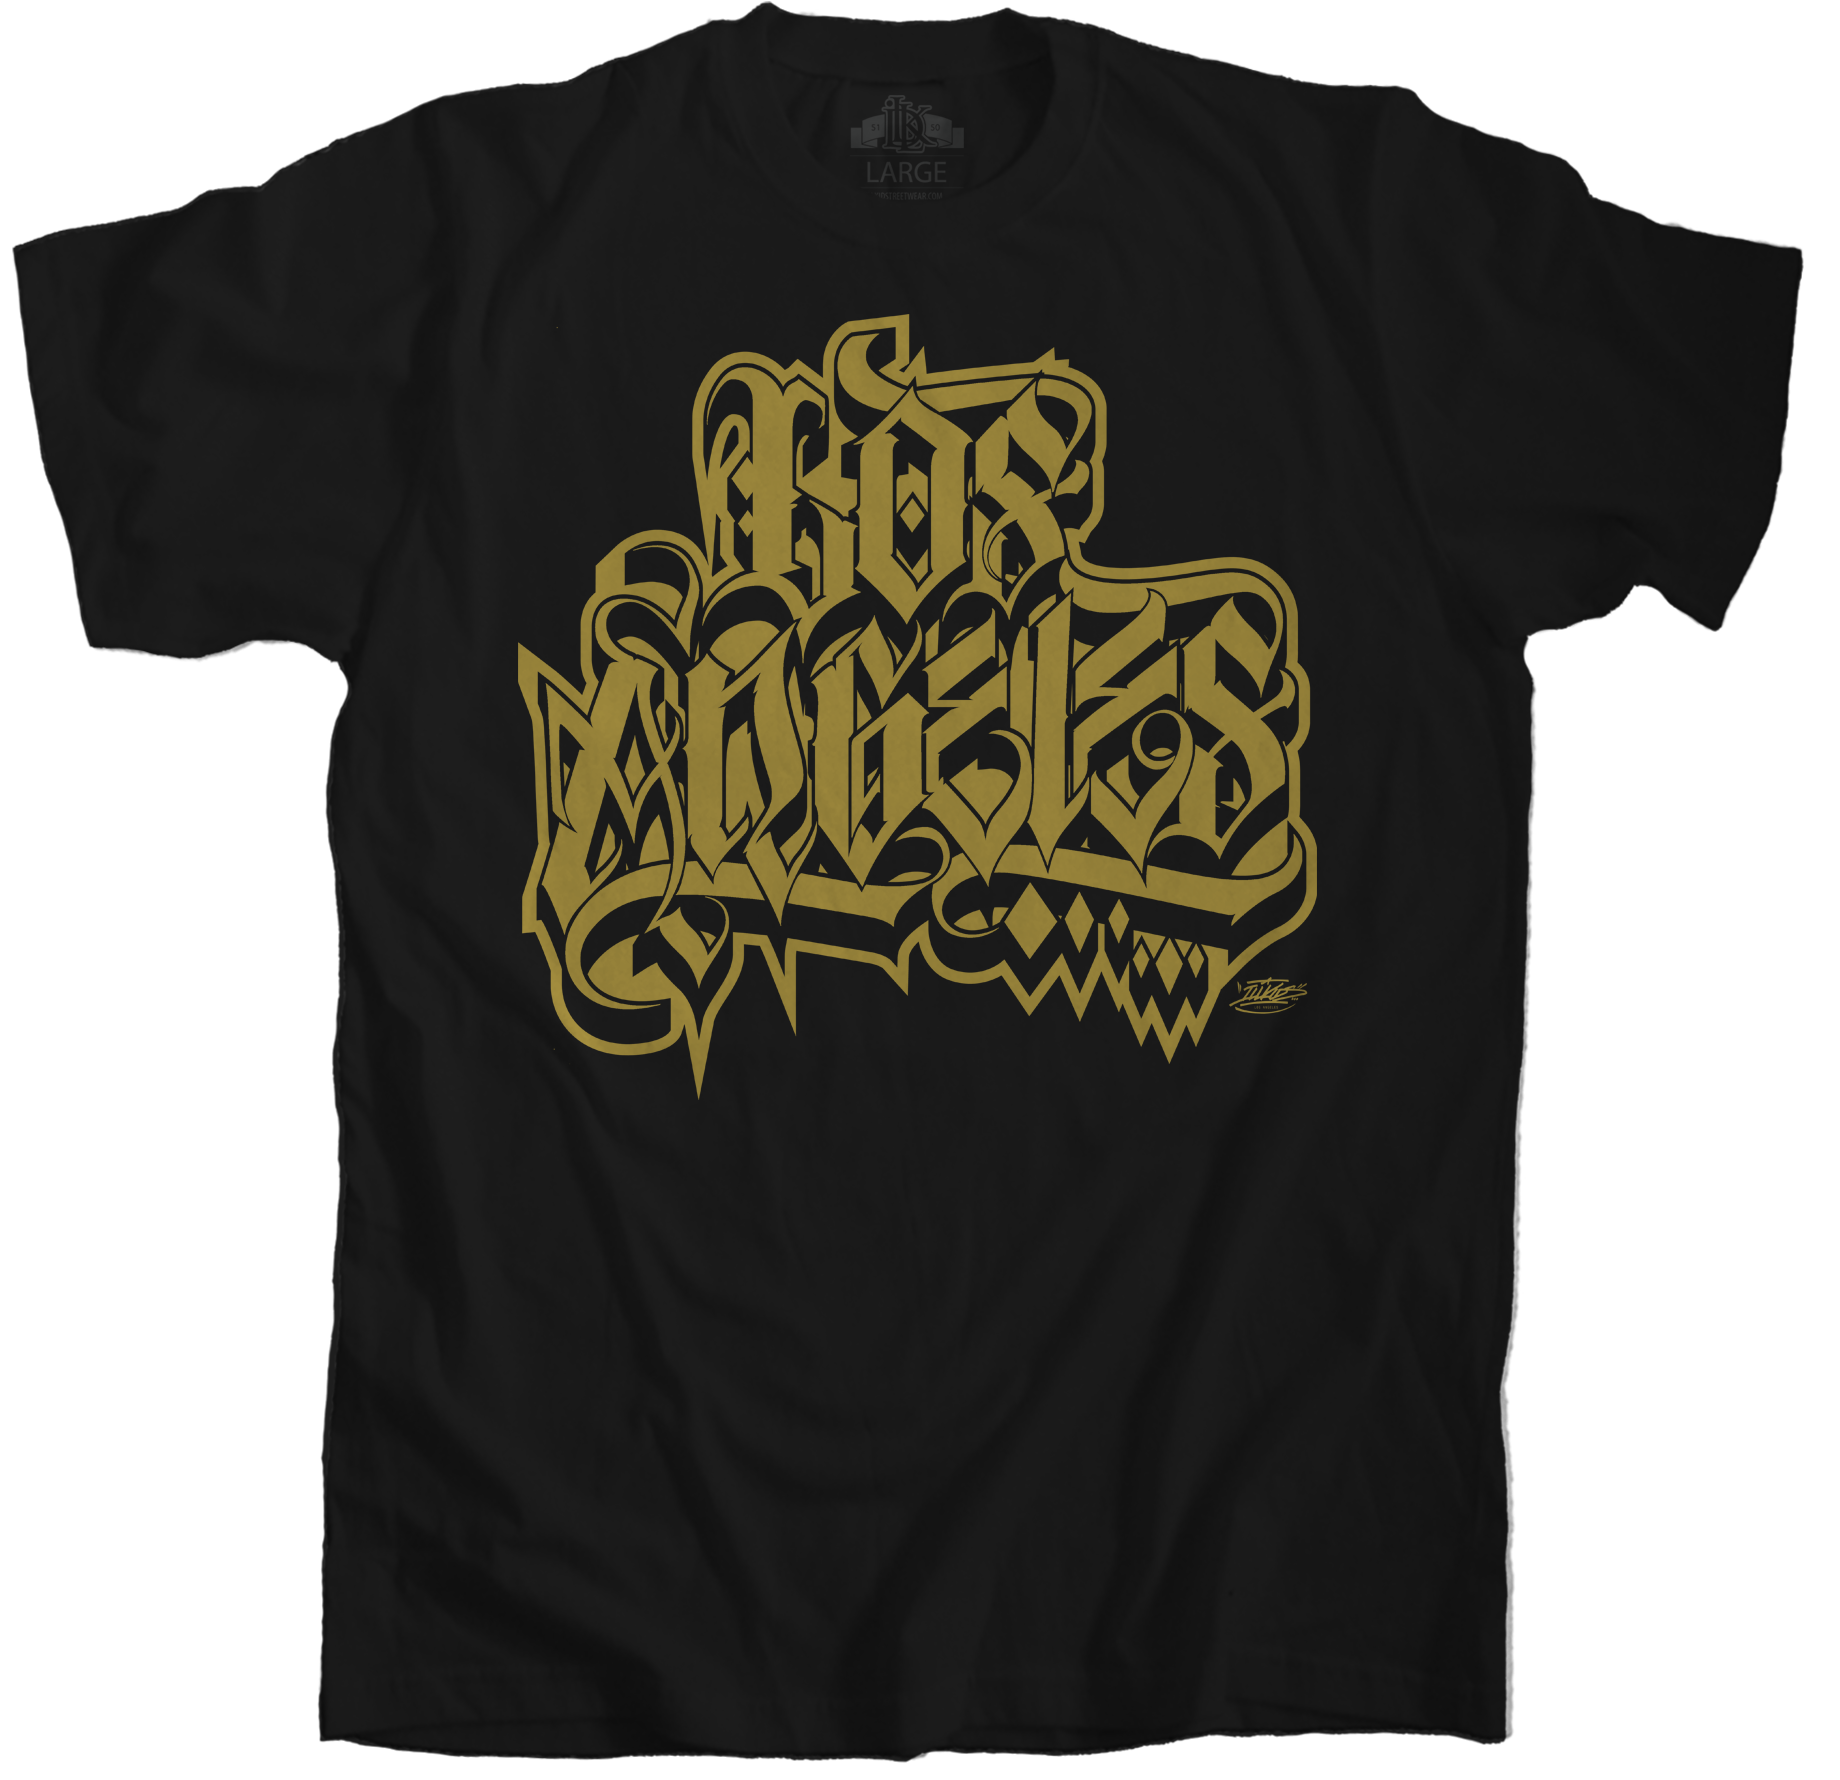 Los Angeles T-Shirt Black and Gold – ILLKids StreetWear